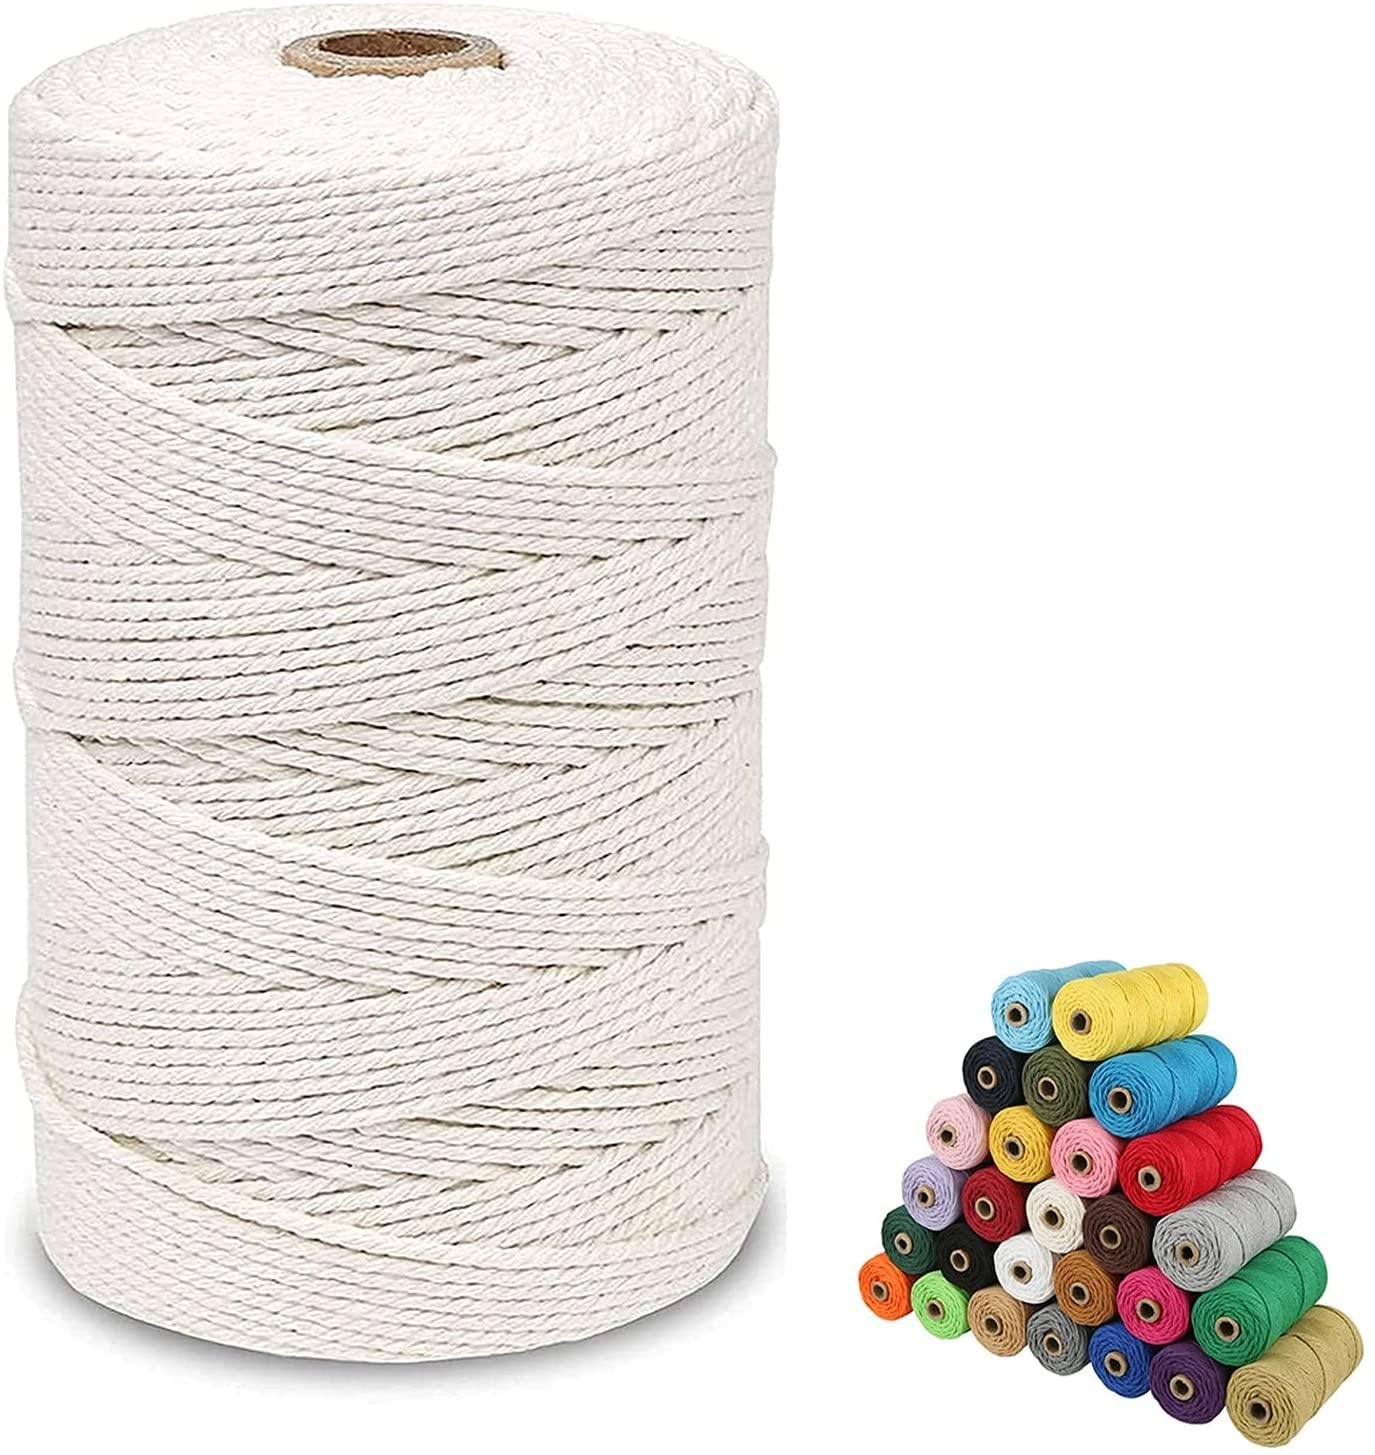 White cotton rope 3mm hand-woven tapestry cotton rope Bohemian 3